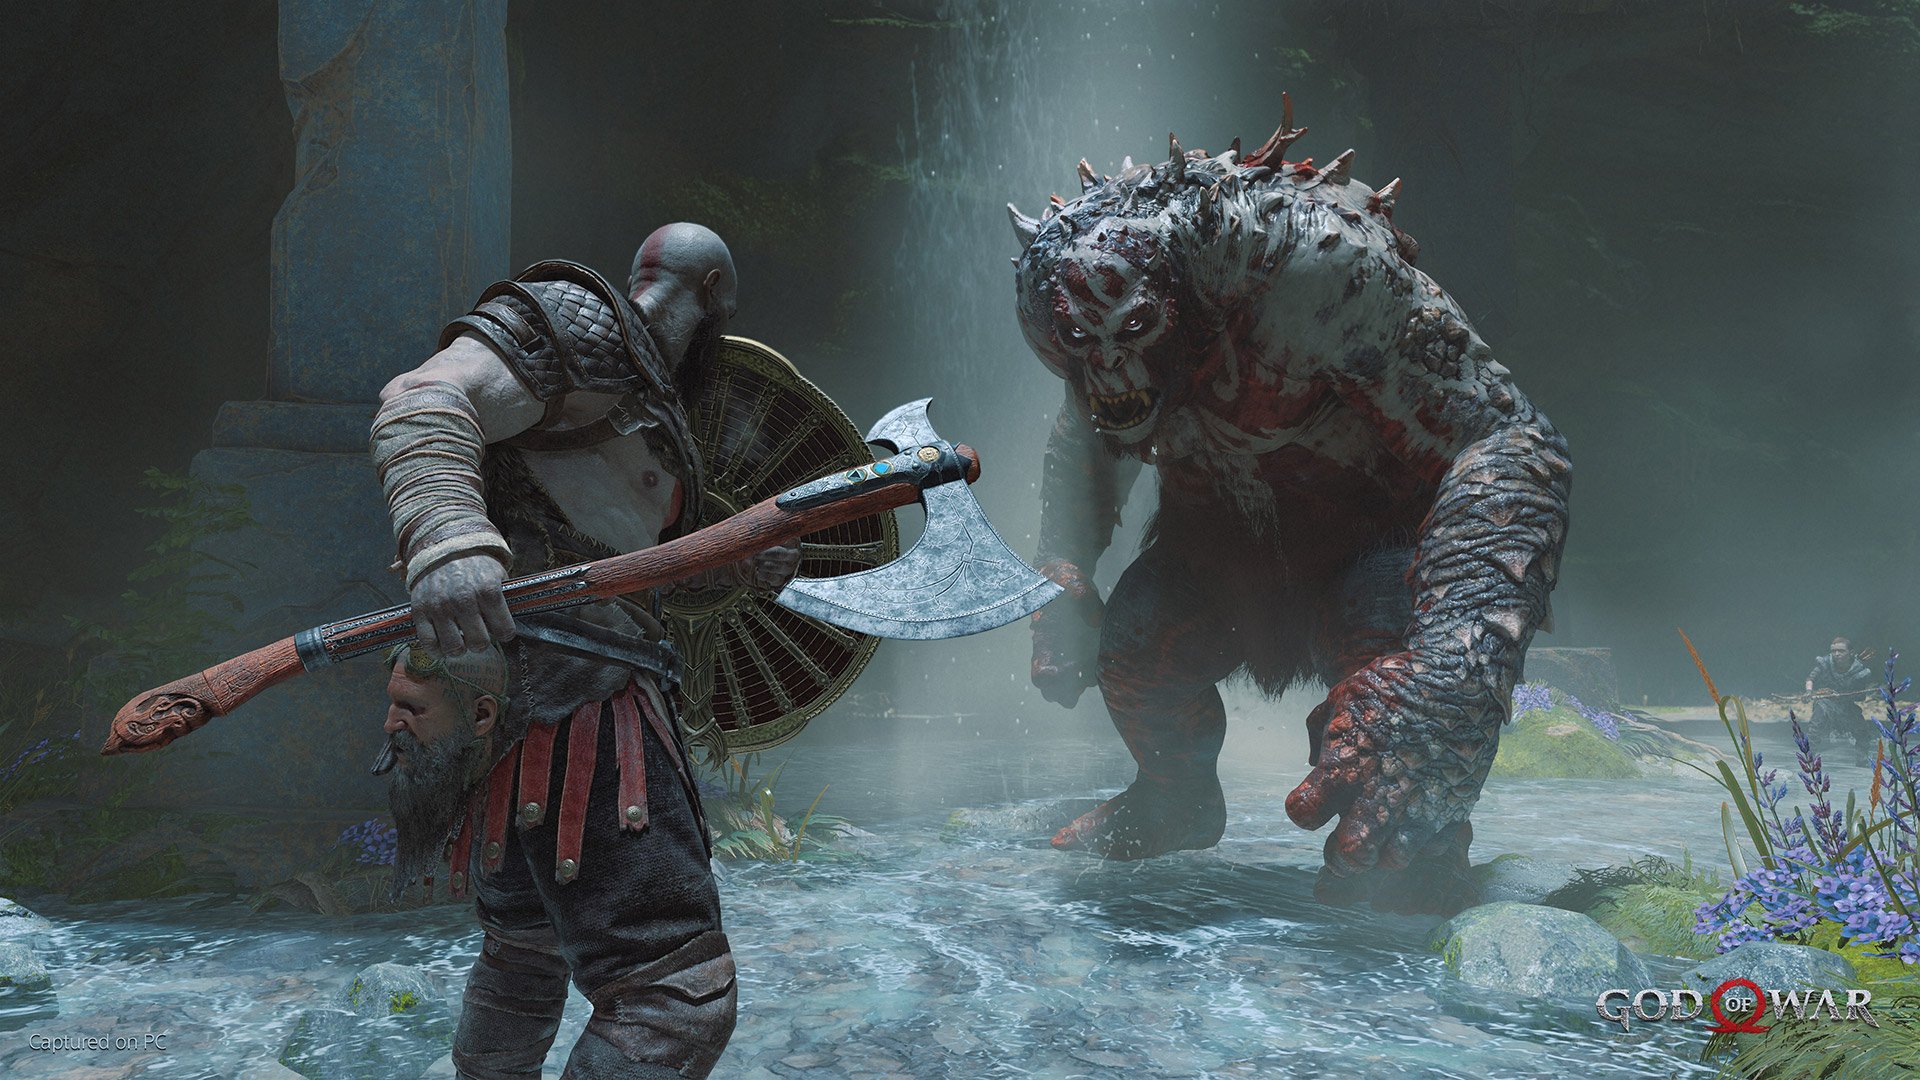 God of War Director Says PlayStation Studios Pushed for PC Support